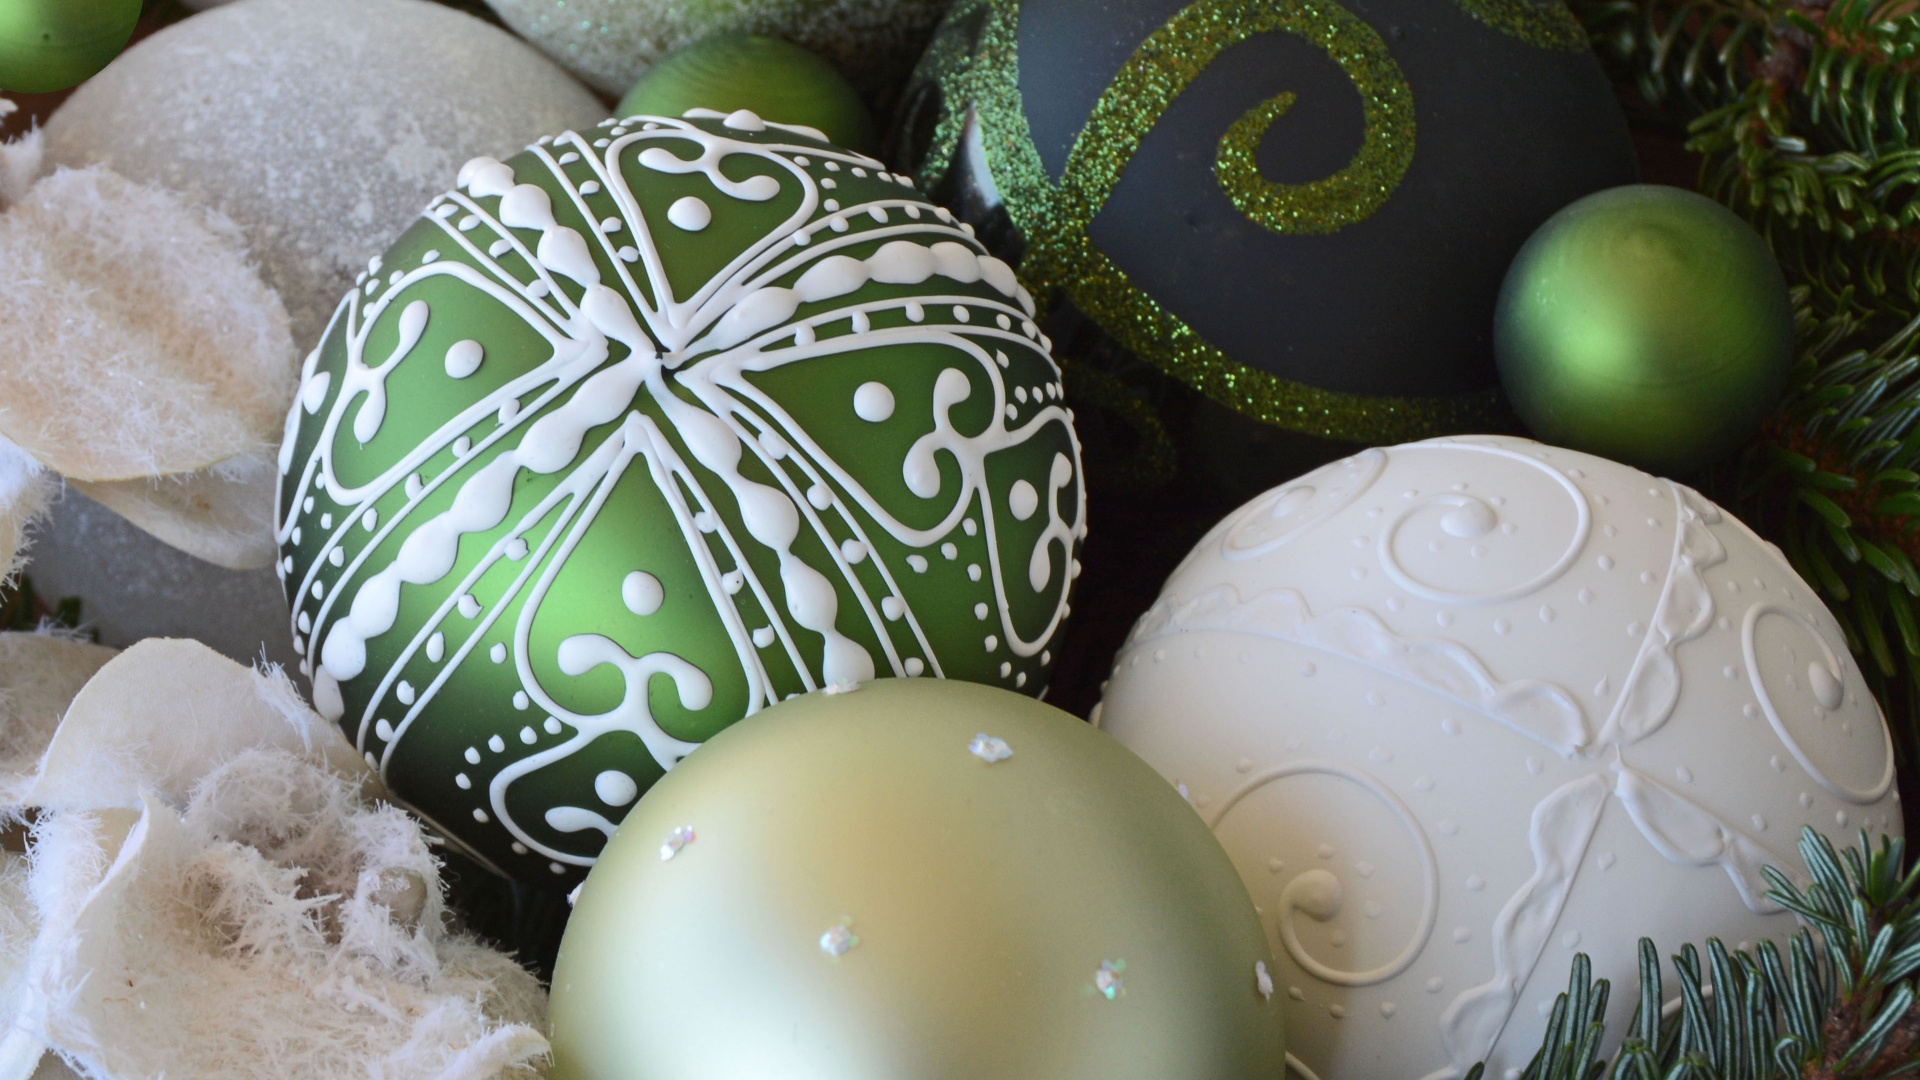 Wallpapers holiday new year balls on the desktop